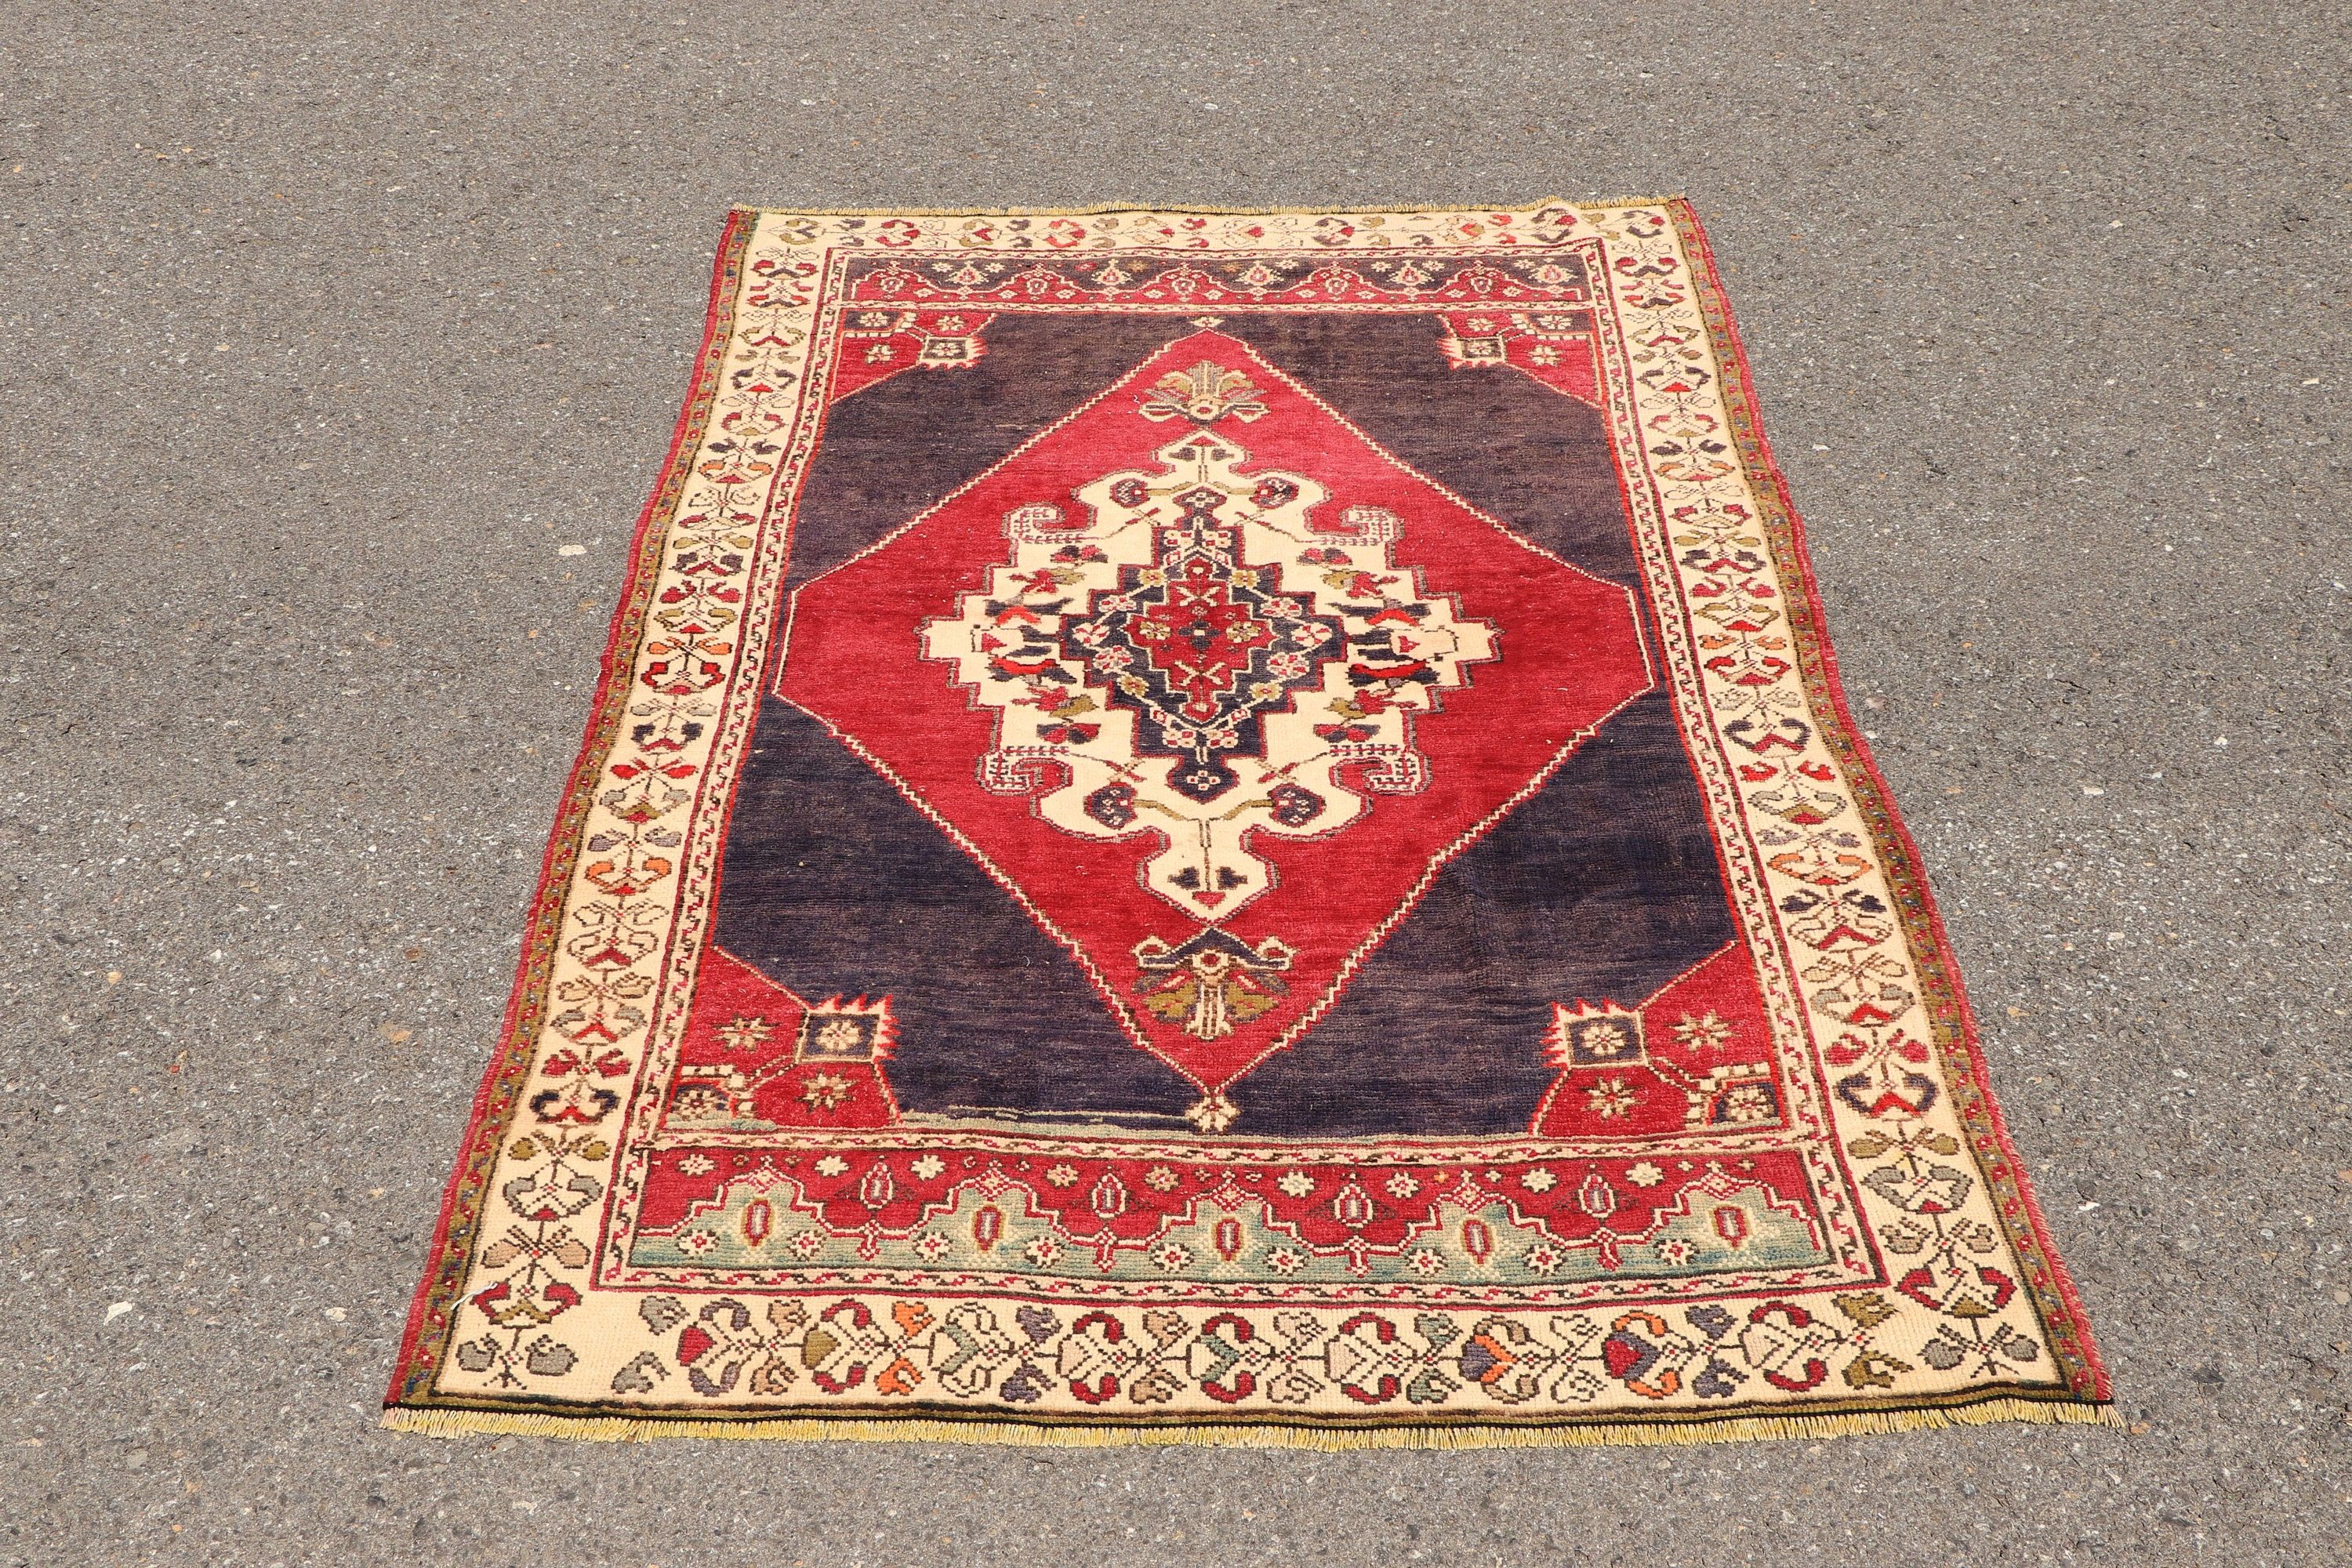 Vintage Rug, Moroccan Rug, Anatolian Rug, Turkish Rugs, Rugs for Entry, 3.9x5.8 ft Accent Rug, Kitchen Rugs, Red Moroccan Rug, Entry Rug